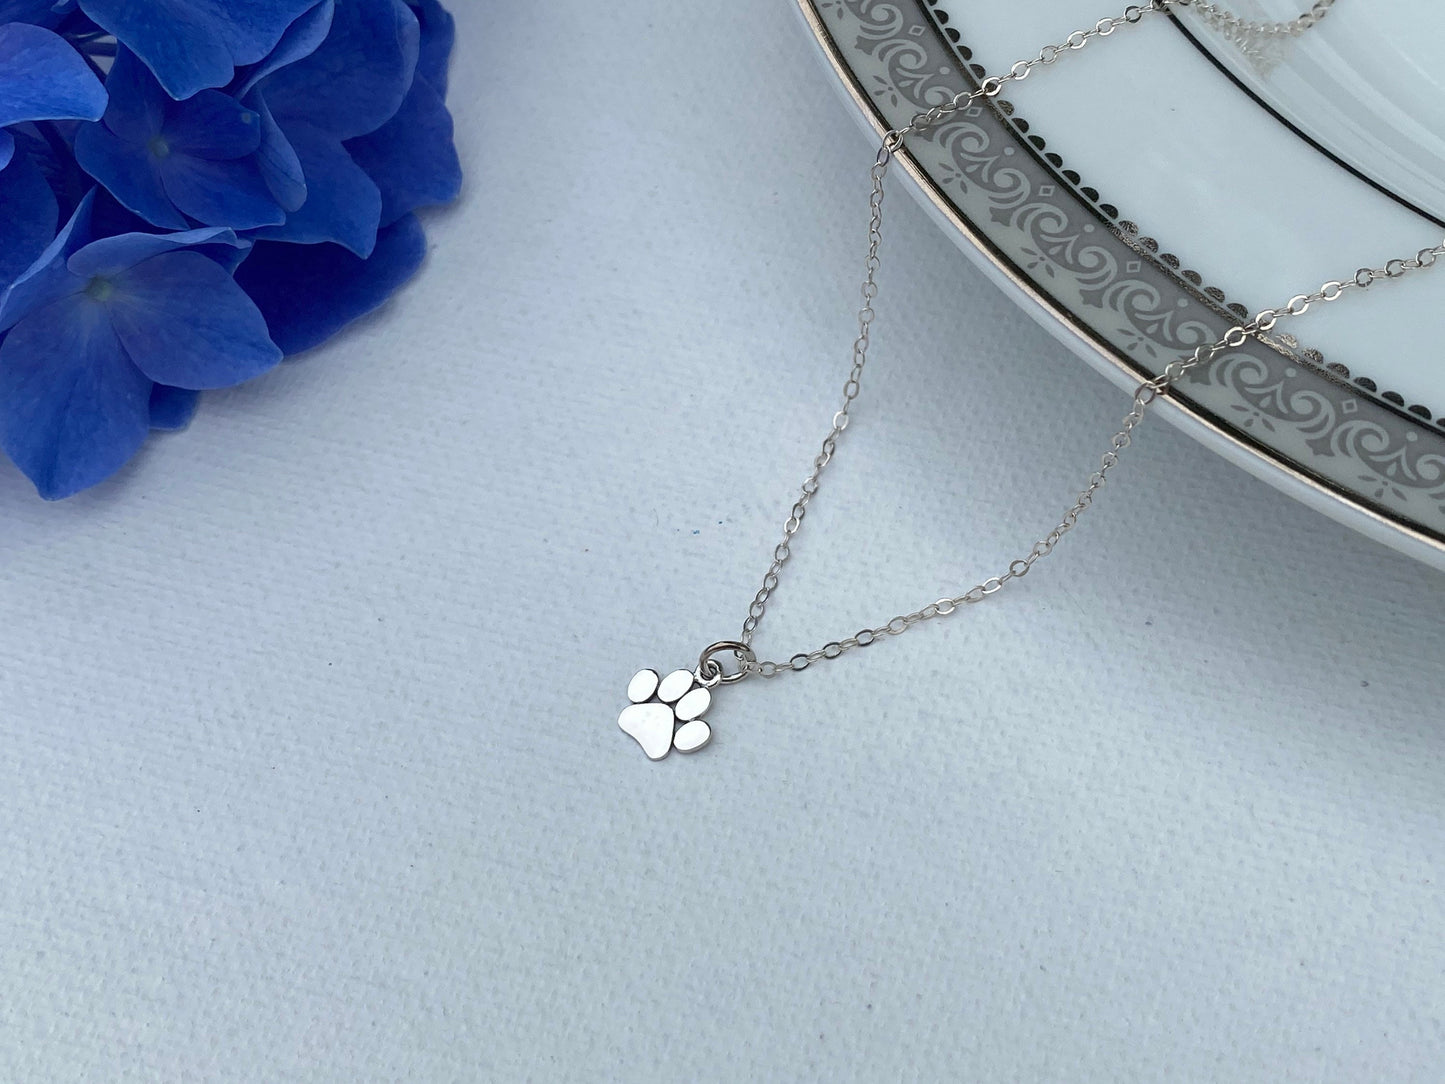 Paw print necklace, sterling silver charm necklace, dog mom or cat mom gift, pet loss, memory necklace, paw necklace